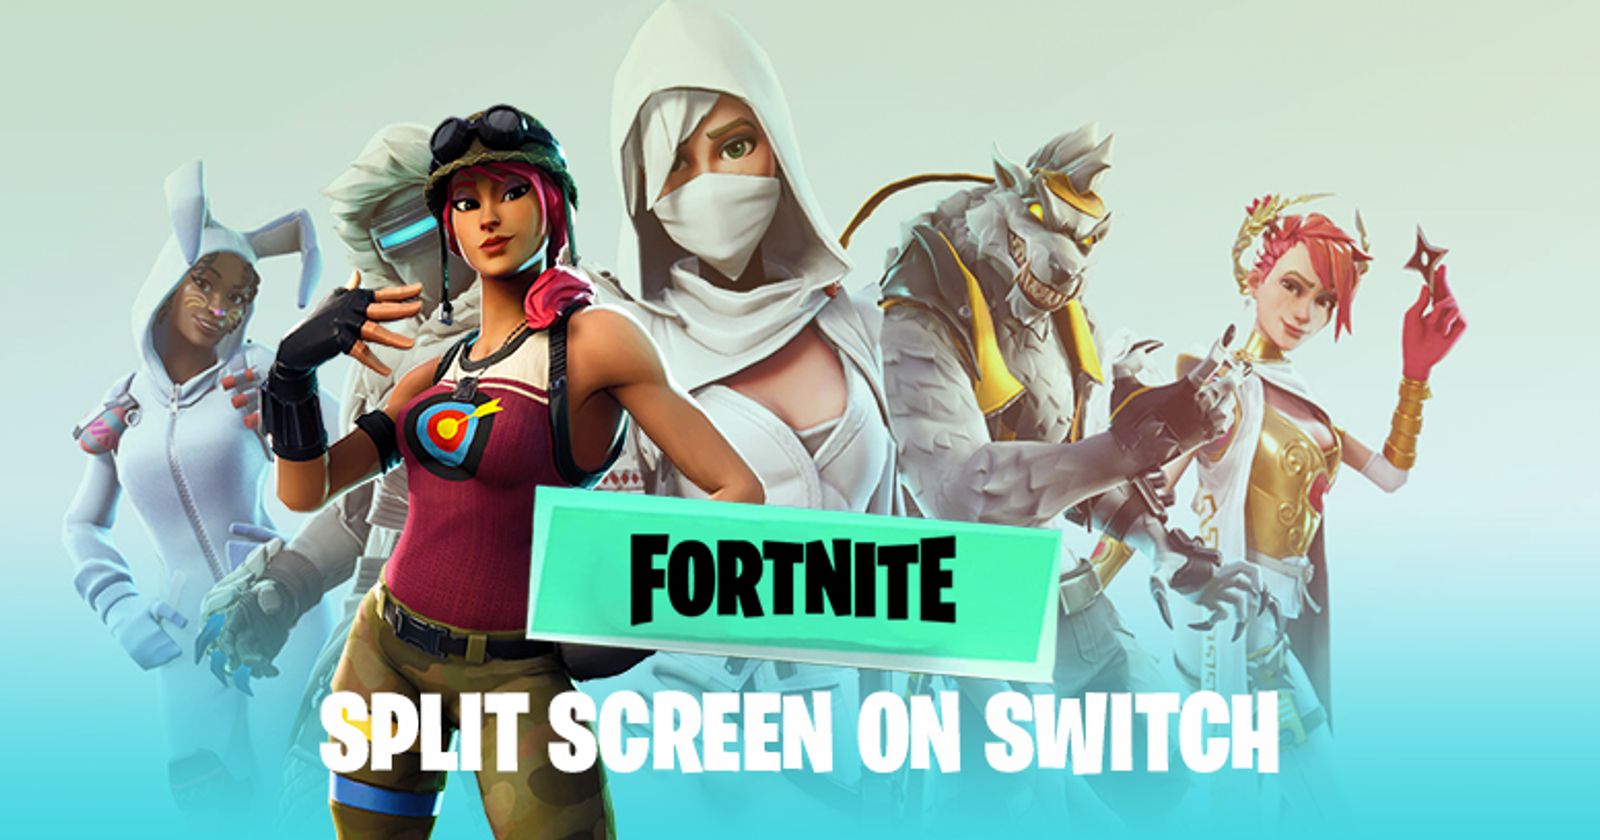 How to play Fortnite Split Screen on Nintendo Switch